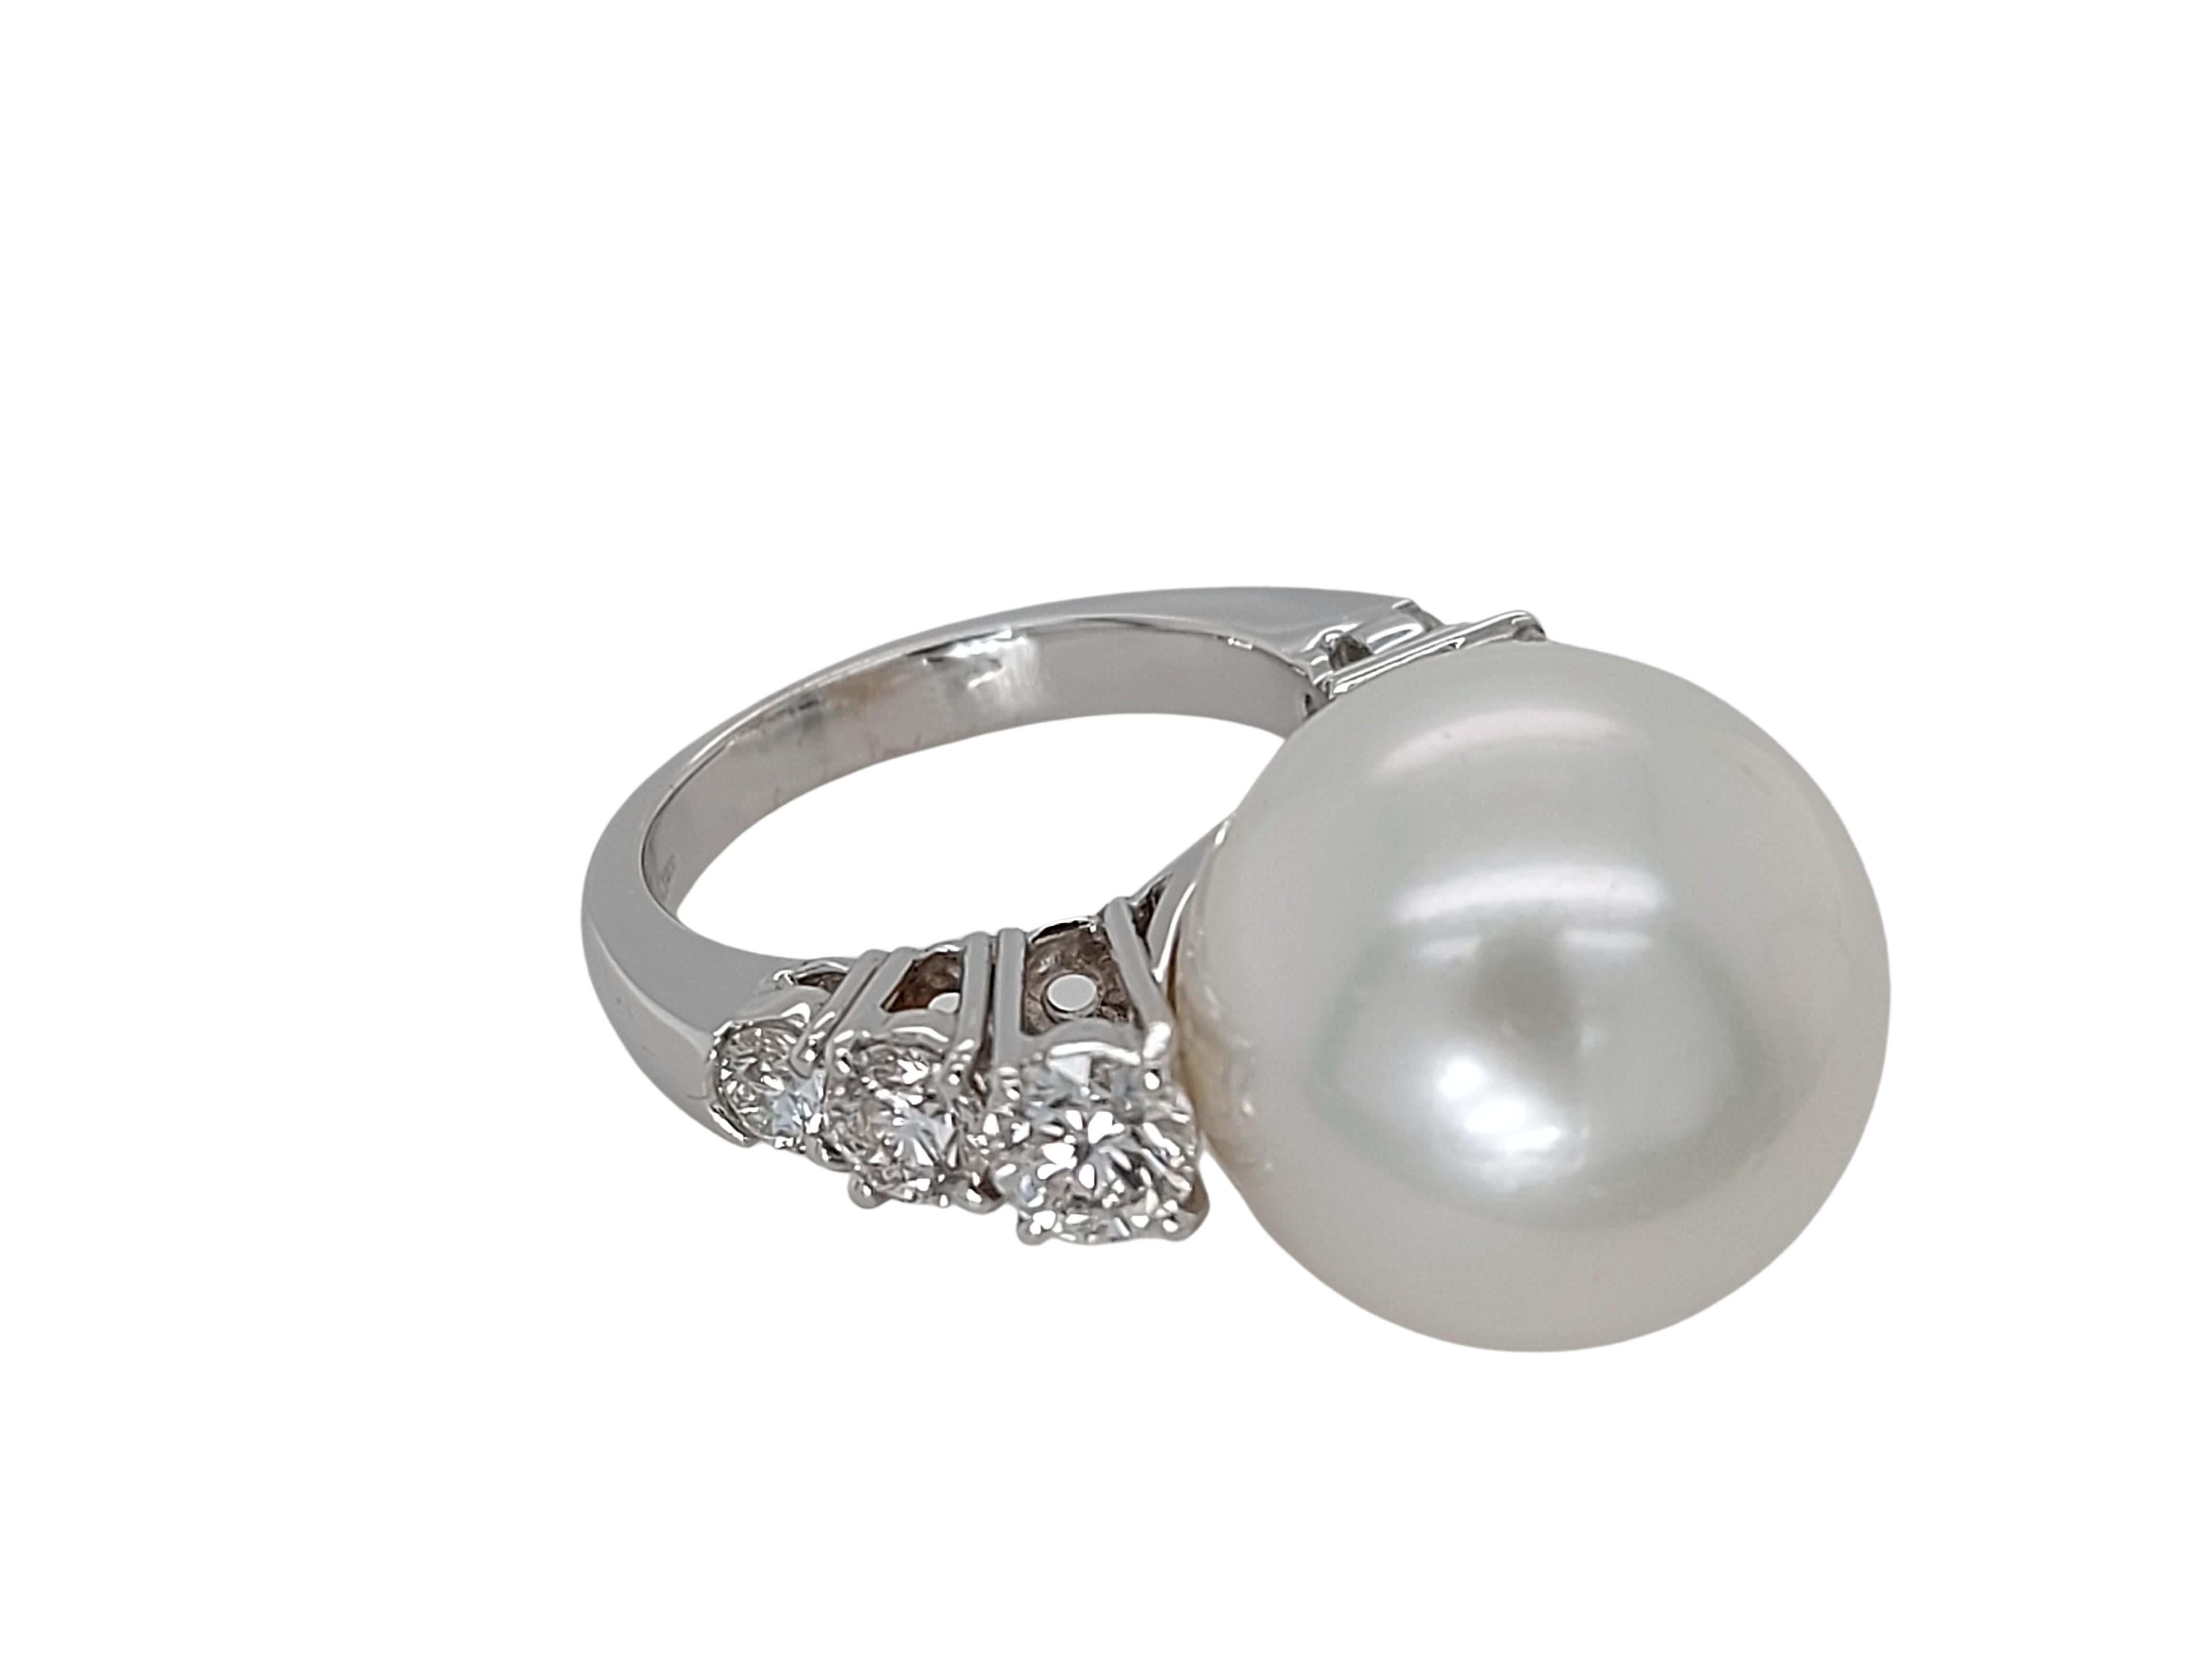 Brilliant Cut 18kt White Gold Ring with 1.64 Carat Diamonds and a Big Pearl South Sea For Sale